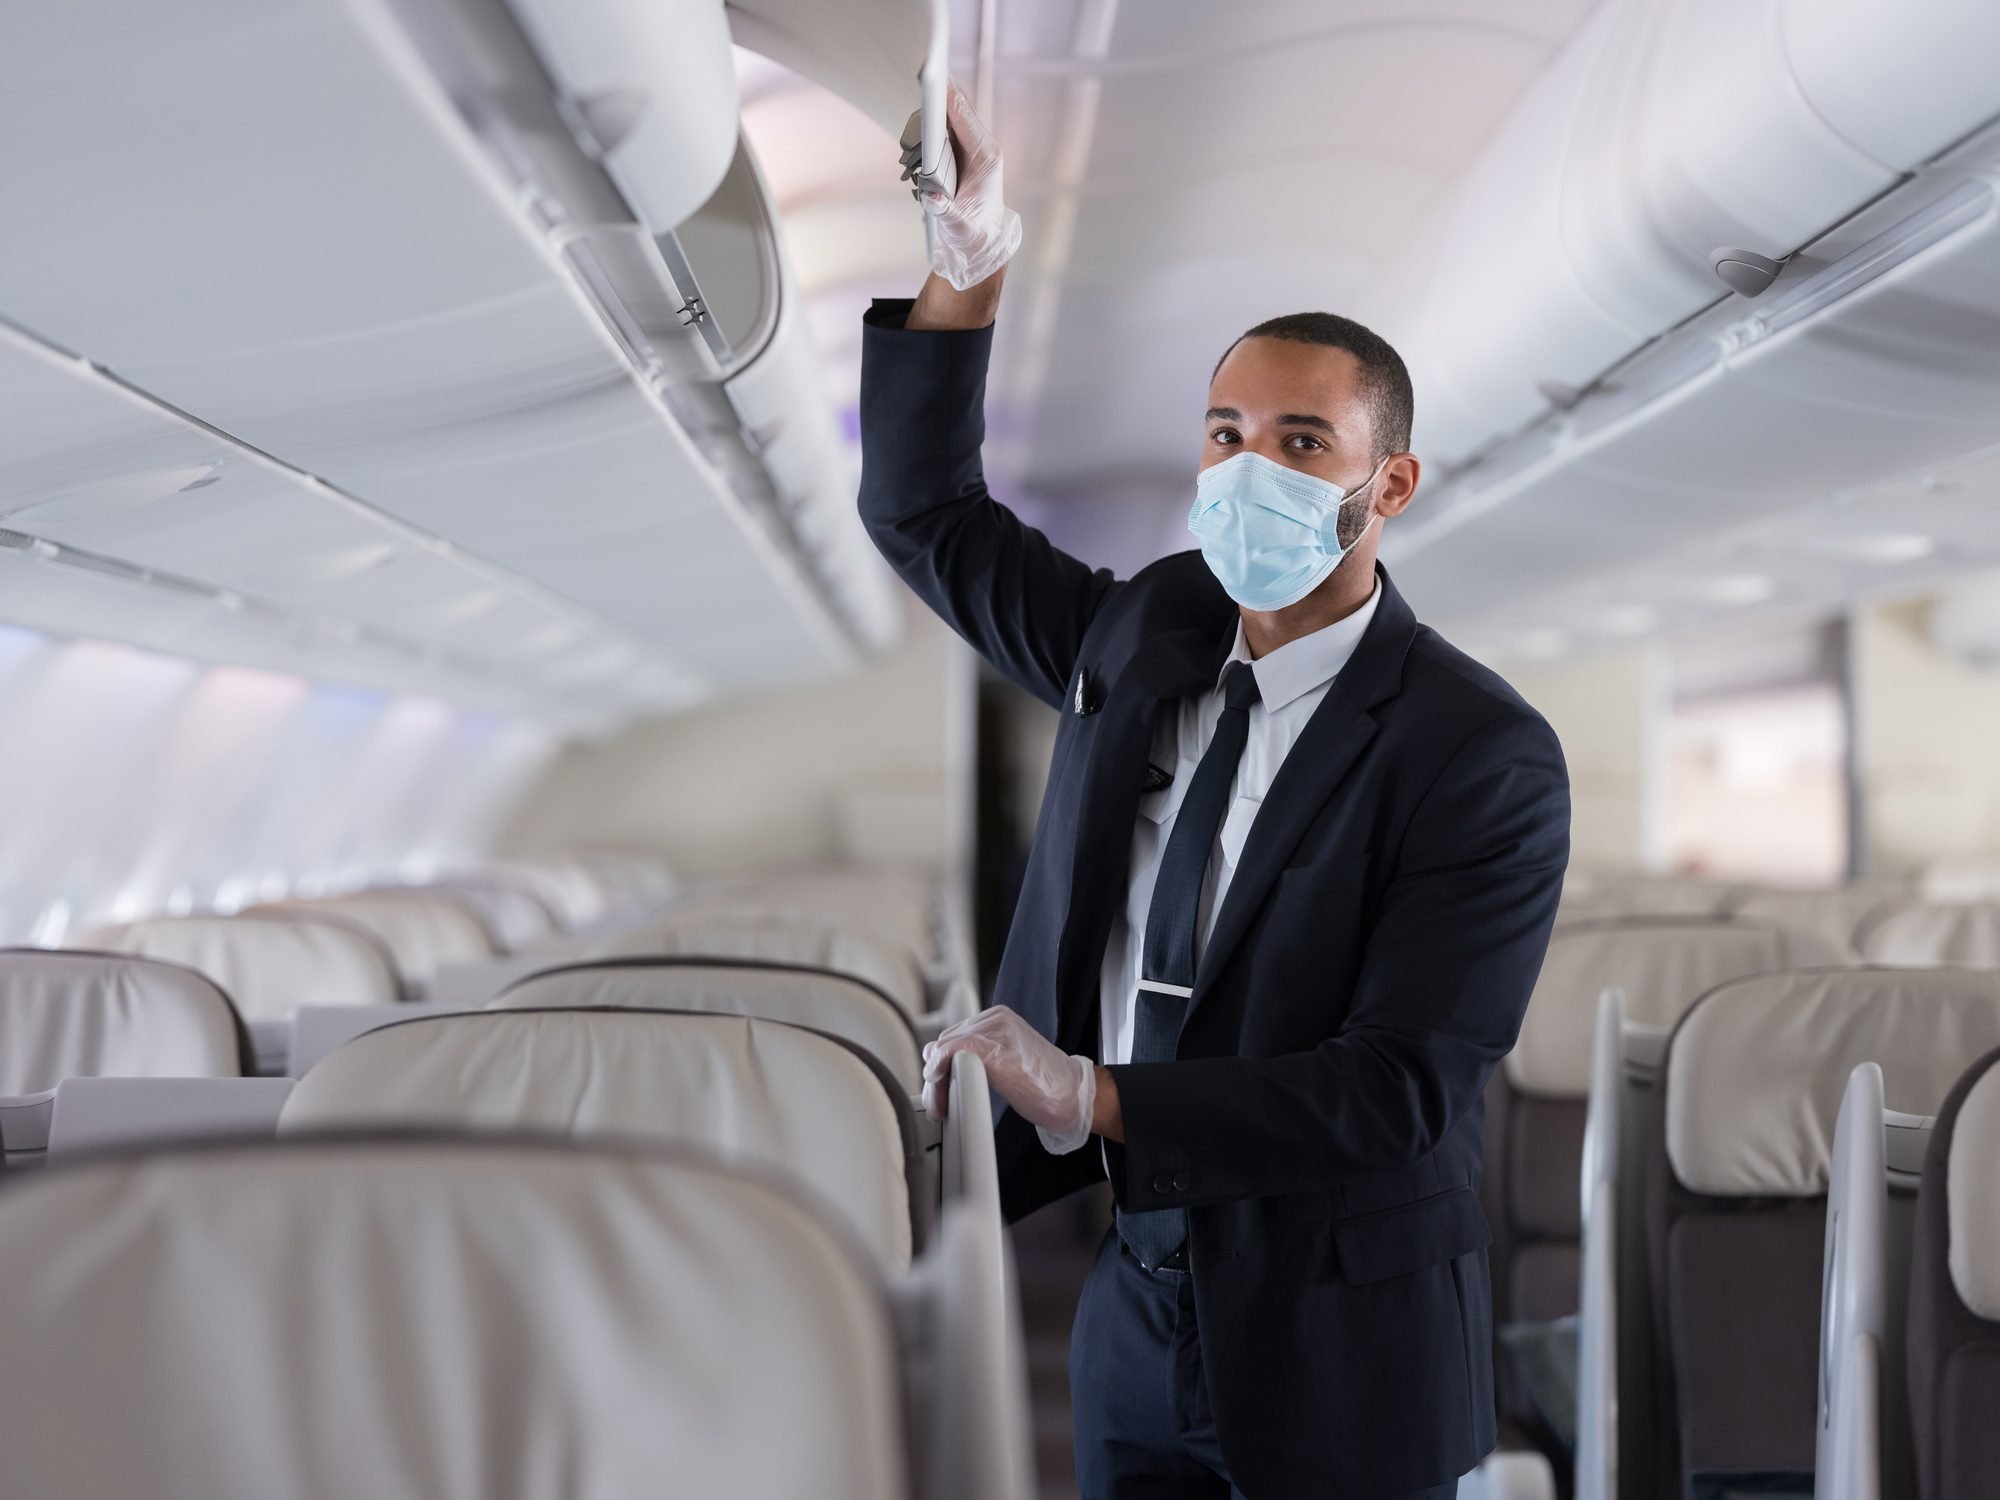 cabin crew on airplane with gloves and mask protection